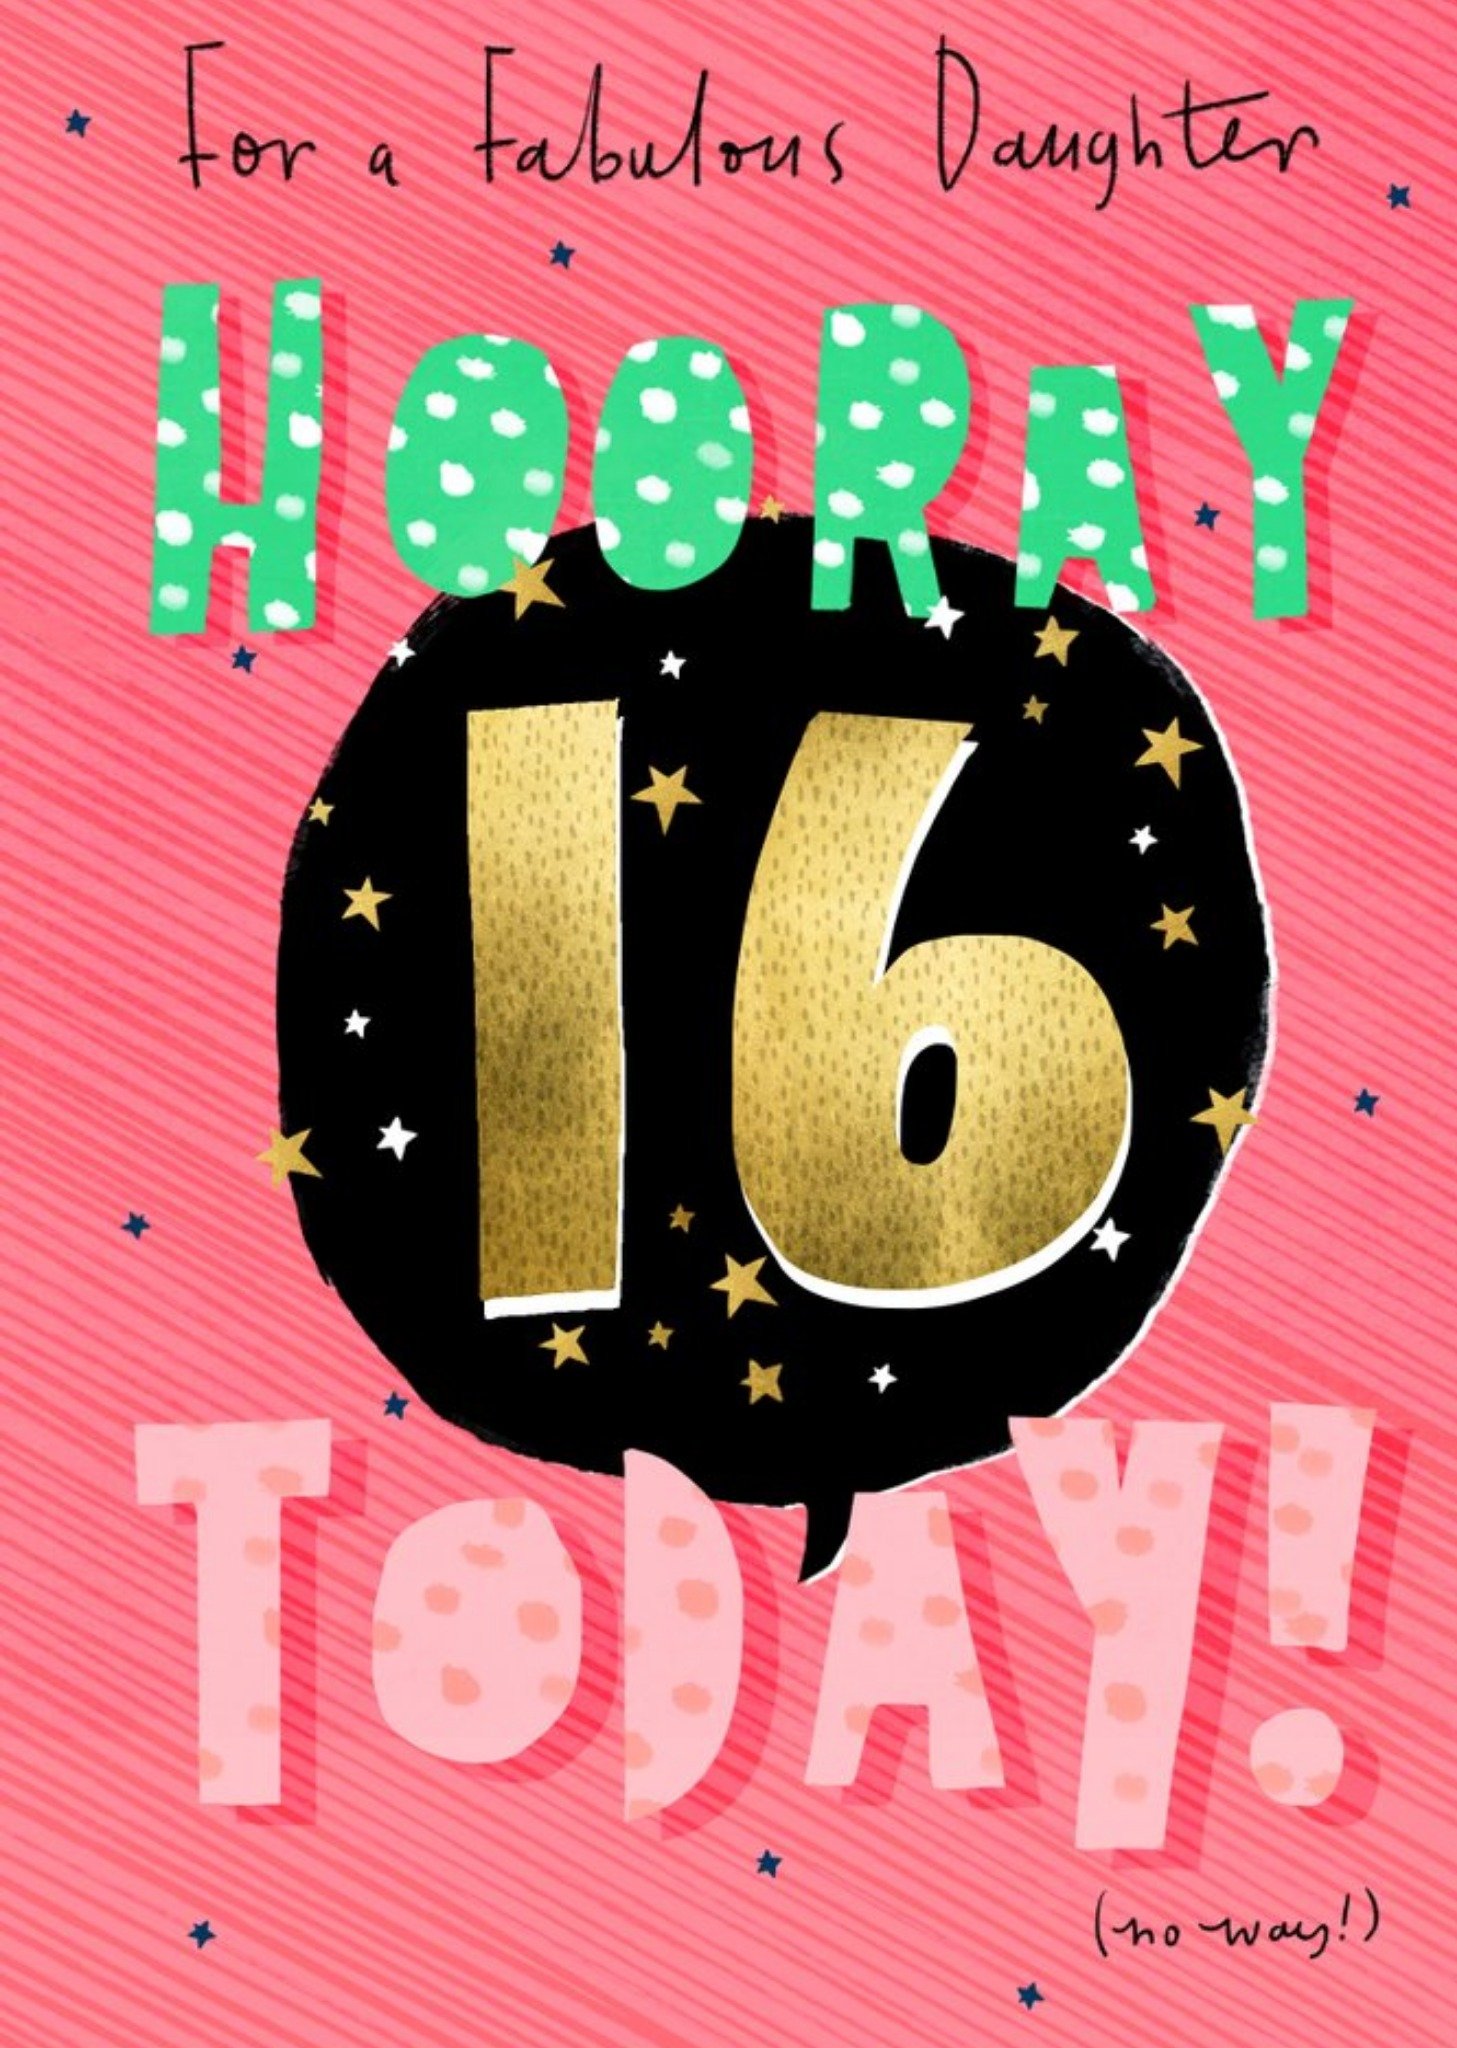 Moonpig Cute Illustration Typographic For A Fabulous Daghter Hooray 16 Today Birthday Card, Large